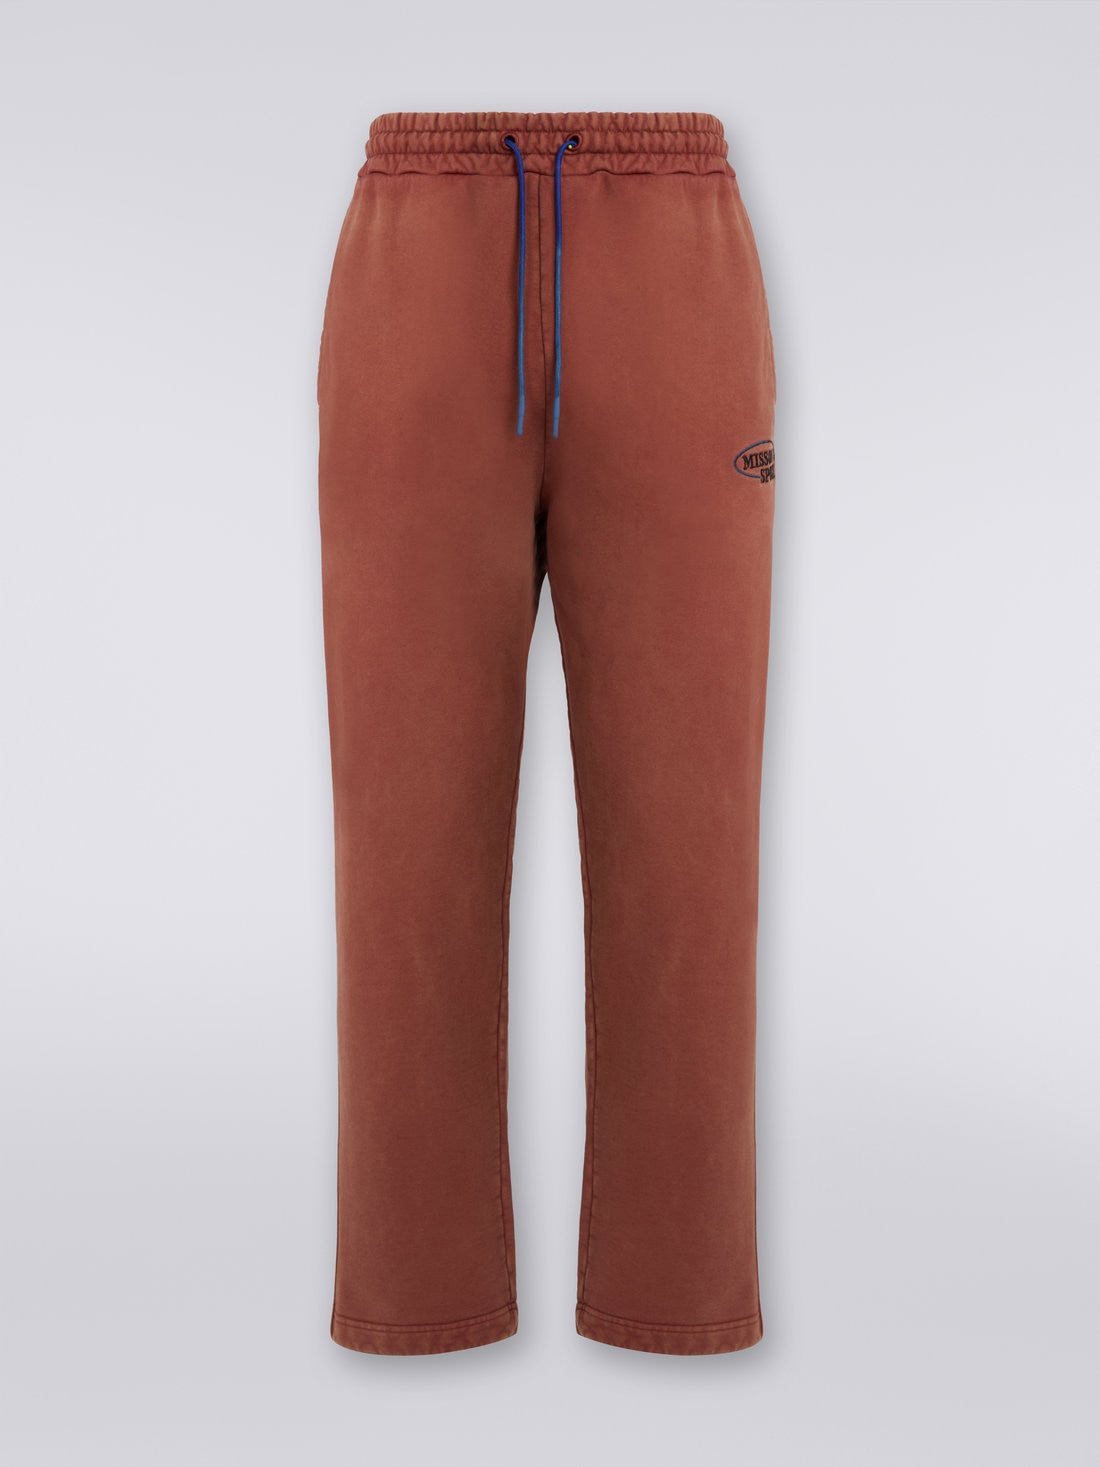 Cotton knit trousers with logo, Rust - TS23WI01BJ00H0S80B7 - 0